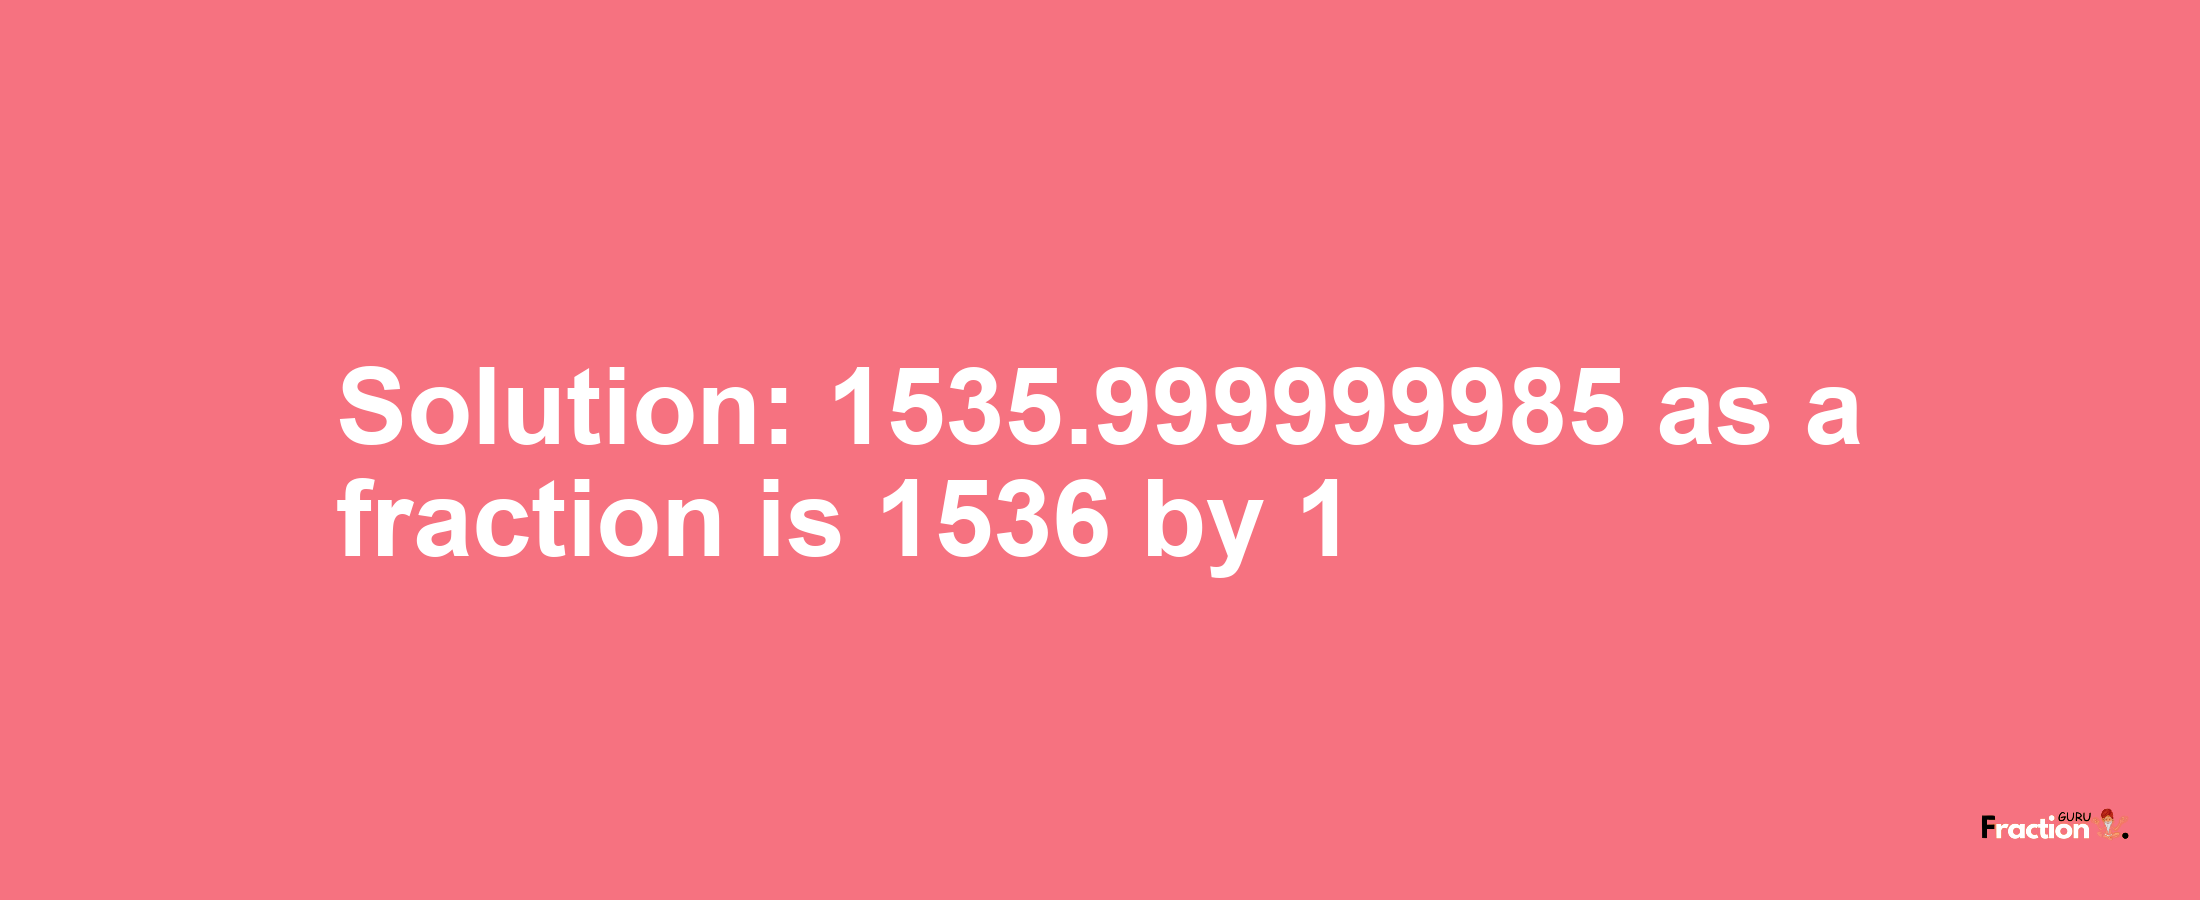 Solution:1535.999999985 as a fraction is 1536/1